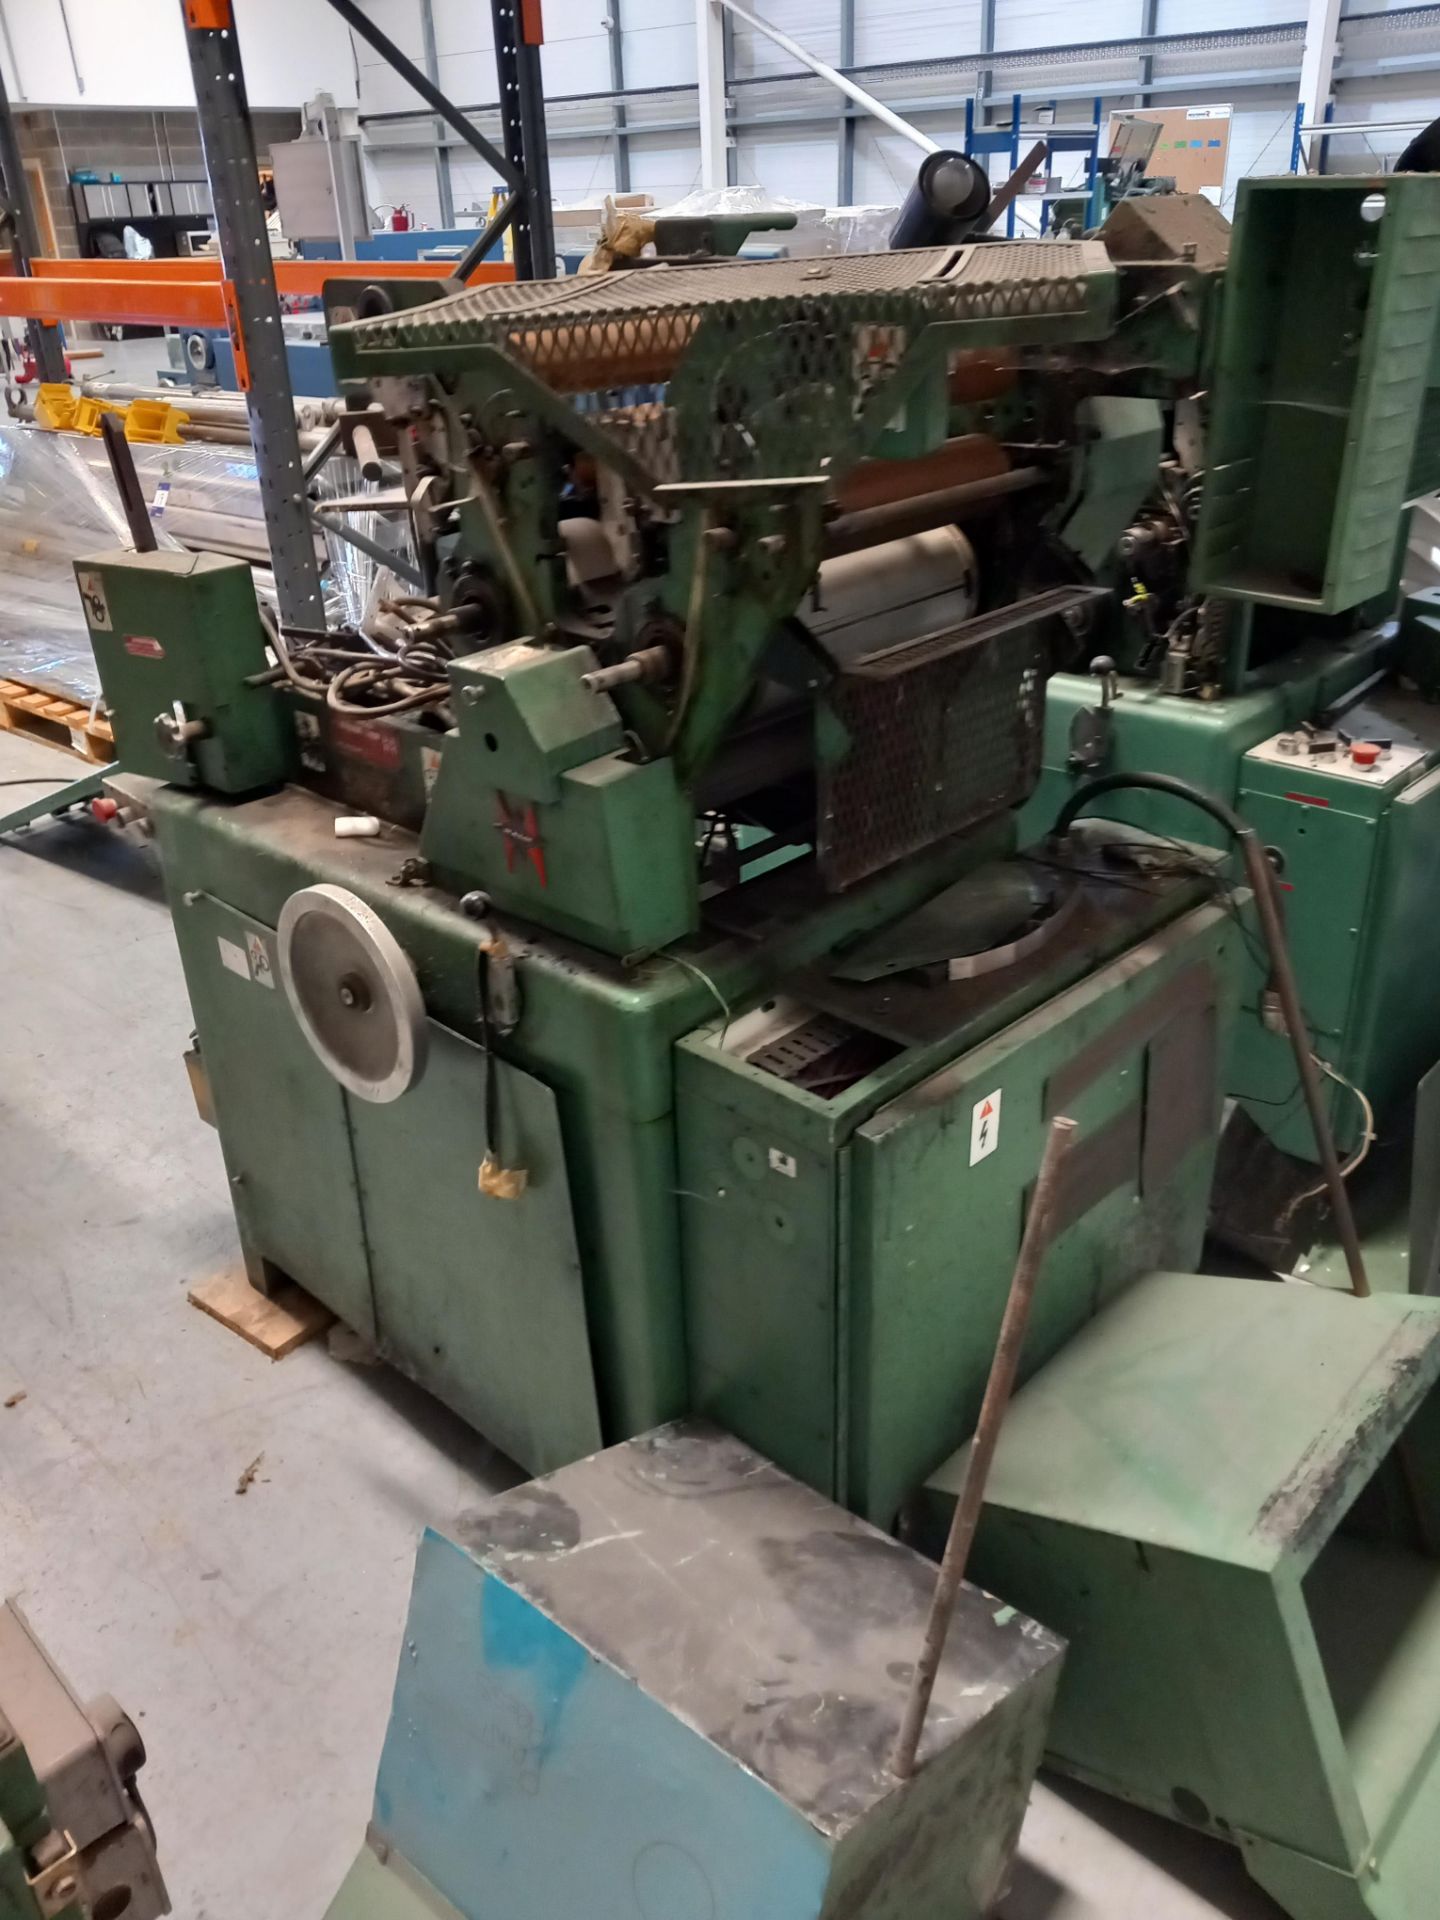 3 Halm jet press machines with selection of spares - Image 5 of 13